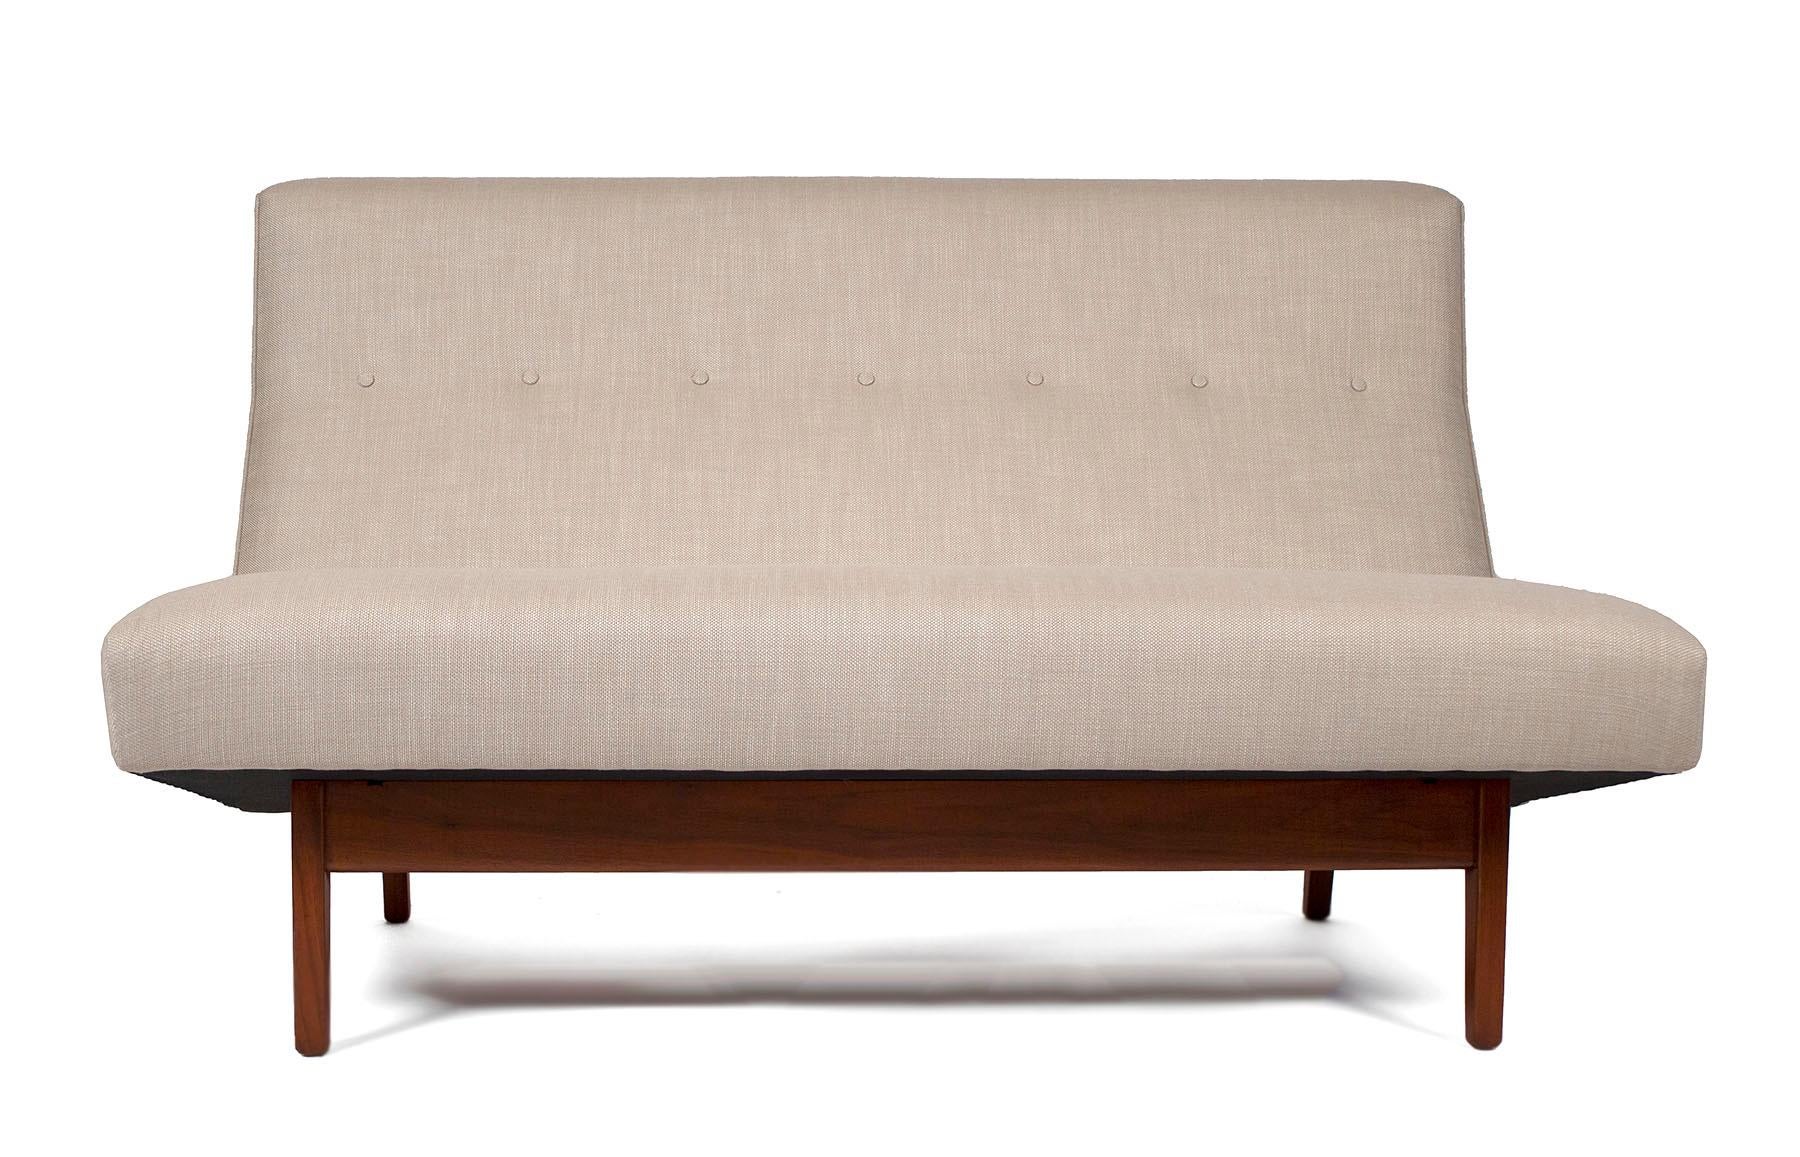 American Jens Risom Armless Settee in Walnut Cradle Frames with Linen Upholstery